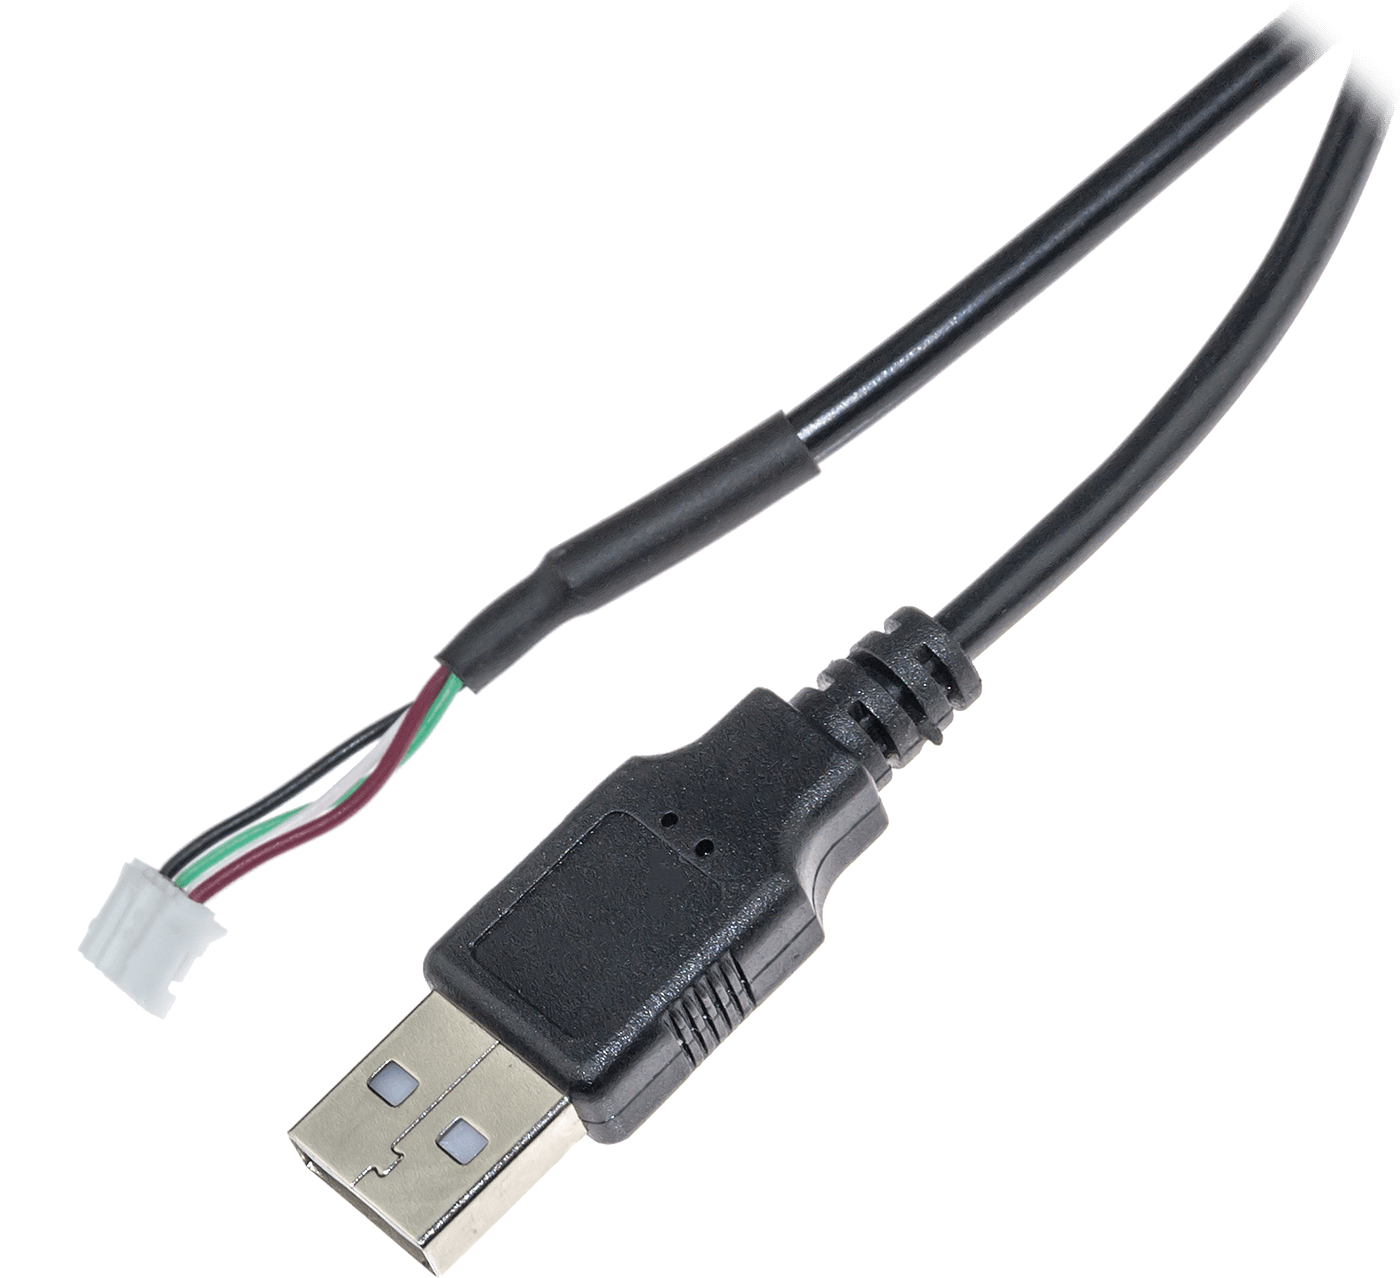 U S B Cable Damaged Exposed Wires PNG image